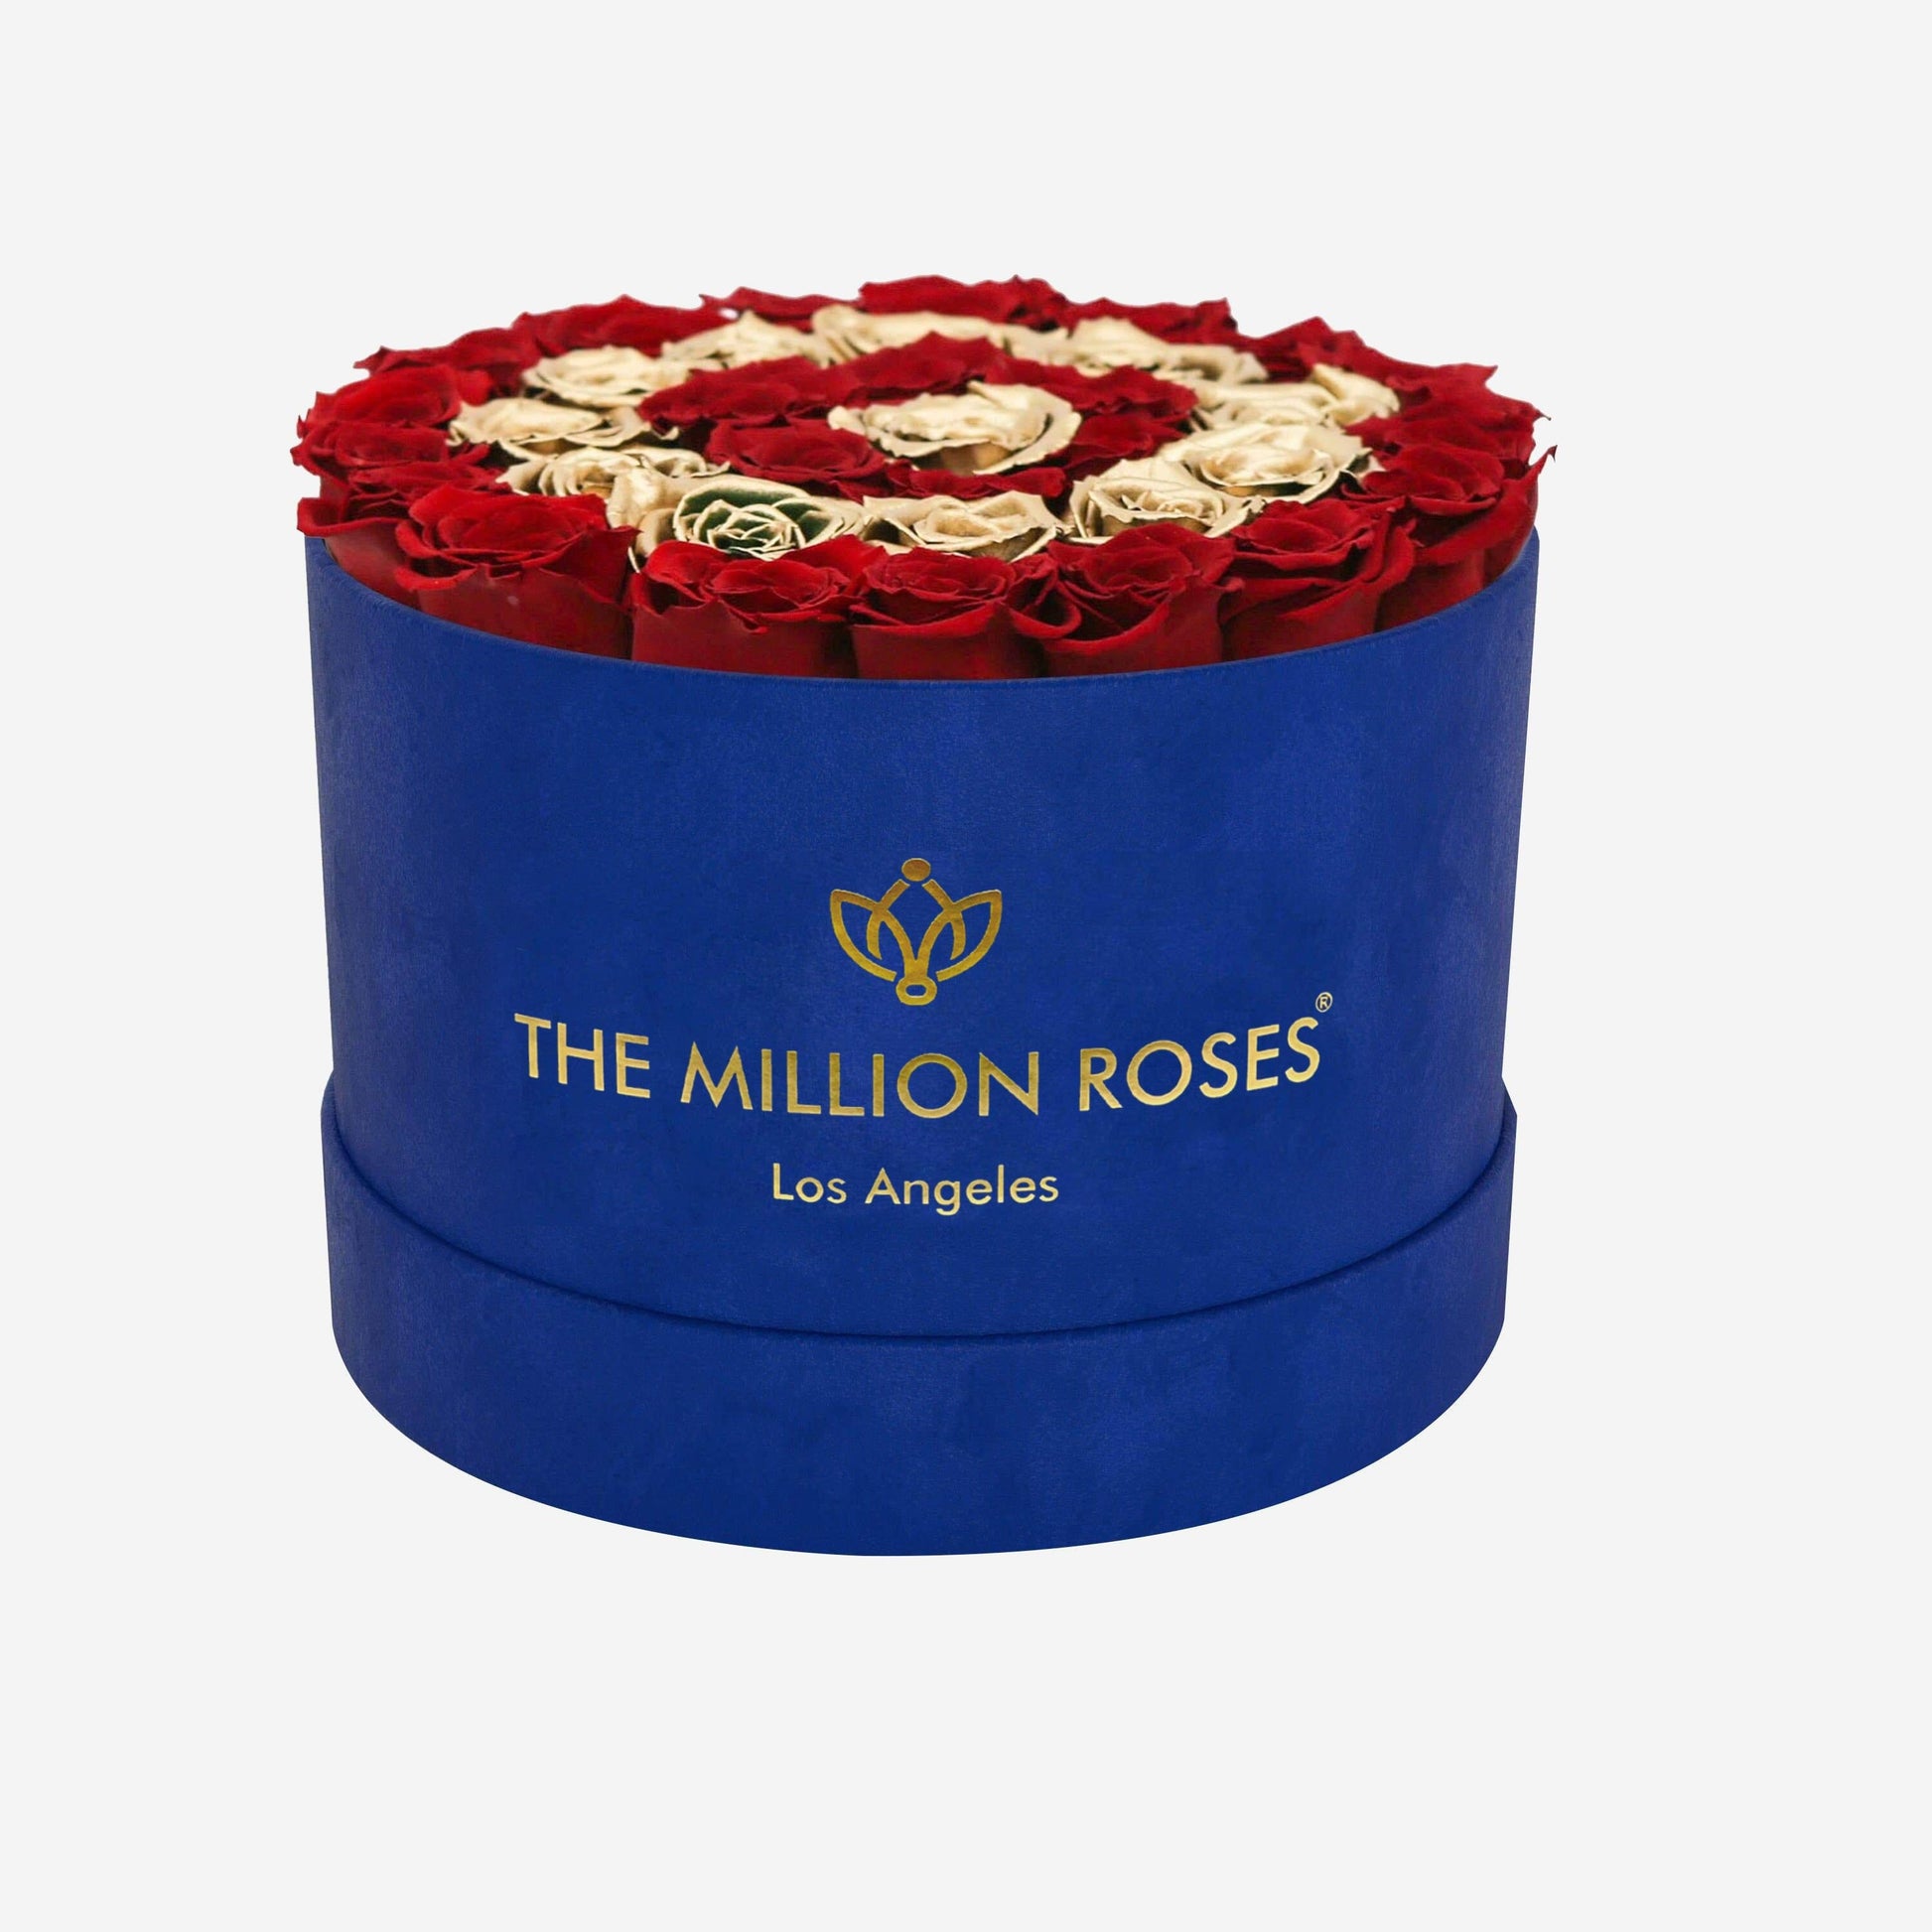 Supreme Royal Blue Suede Box | Red & Gold Roses | Target - The Million Roses